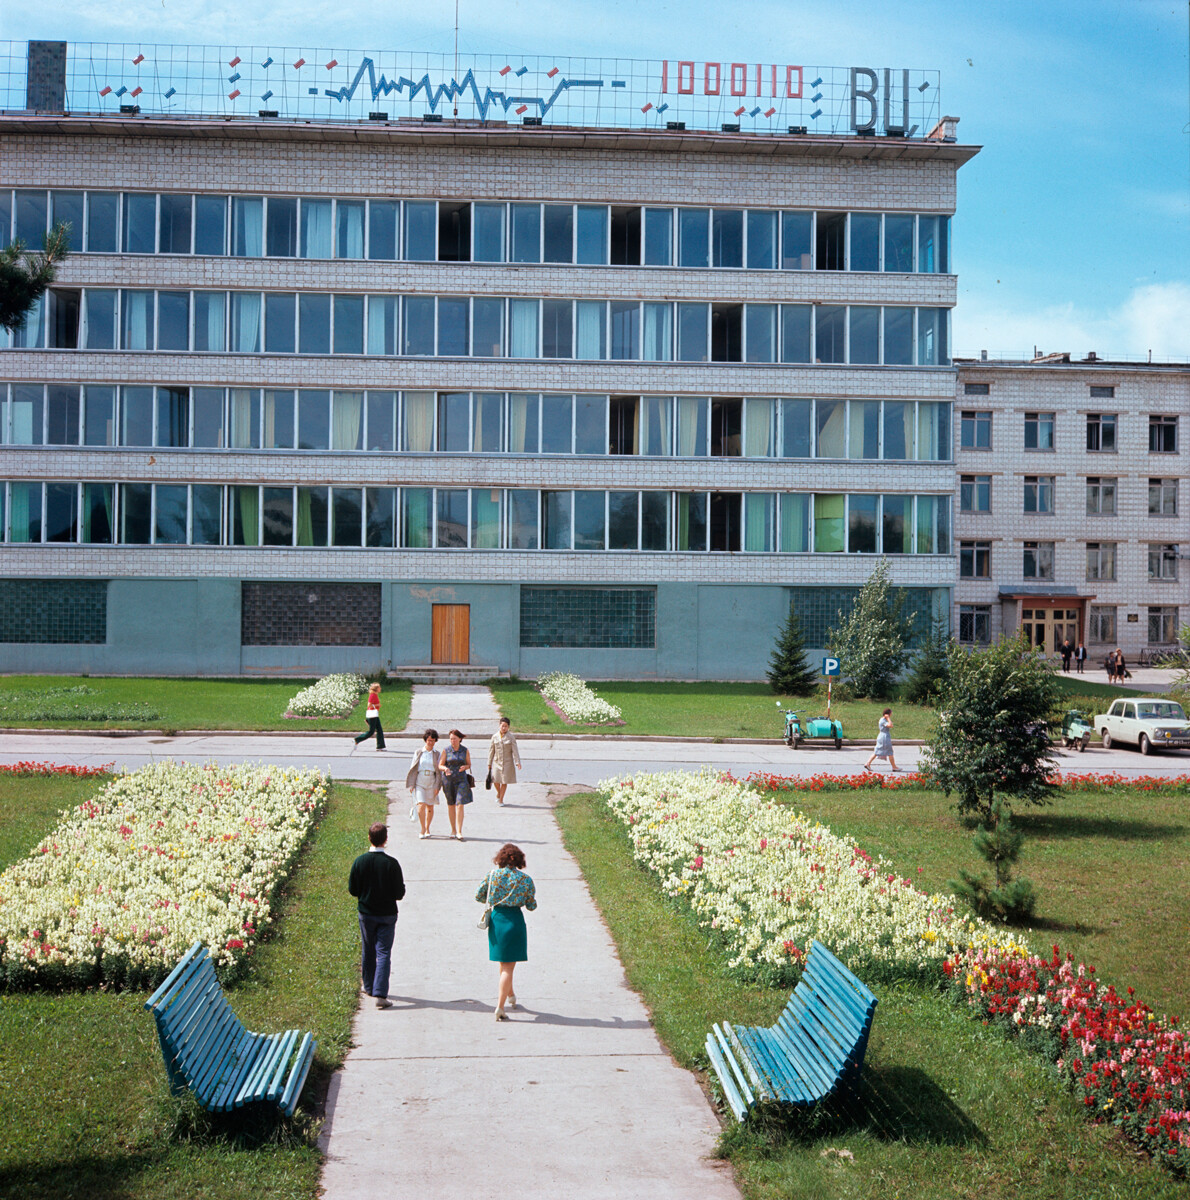 The building of the Computer Center of the Siberian Branch of the Academy of Sciences of the USSR. Akademgorodok, 1977.